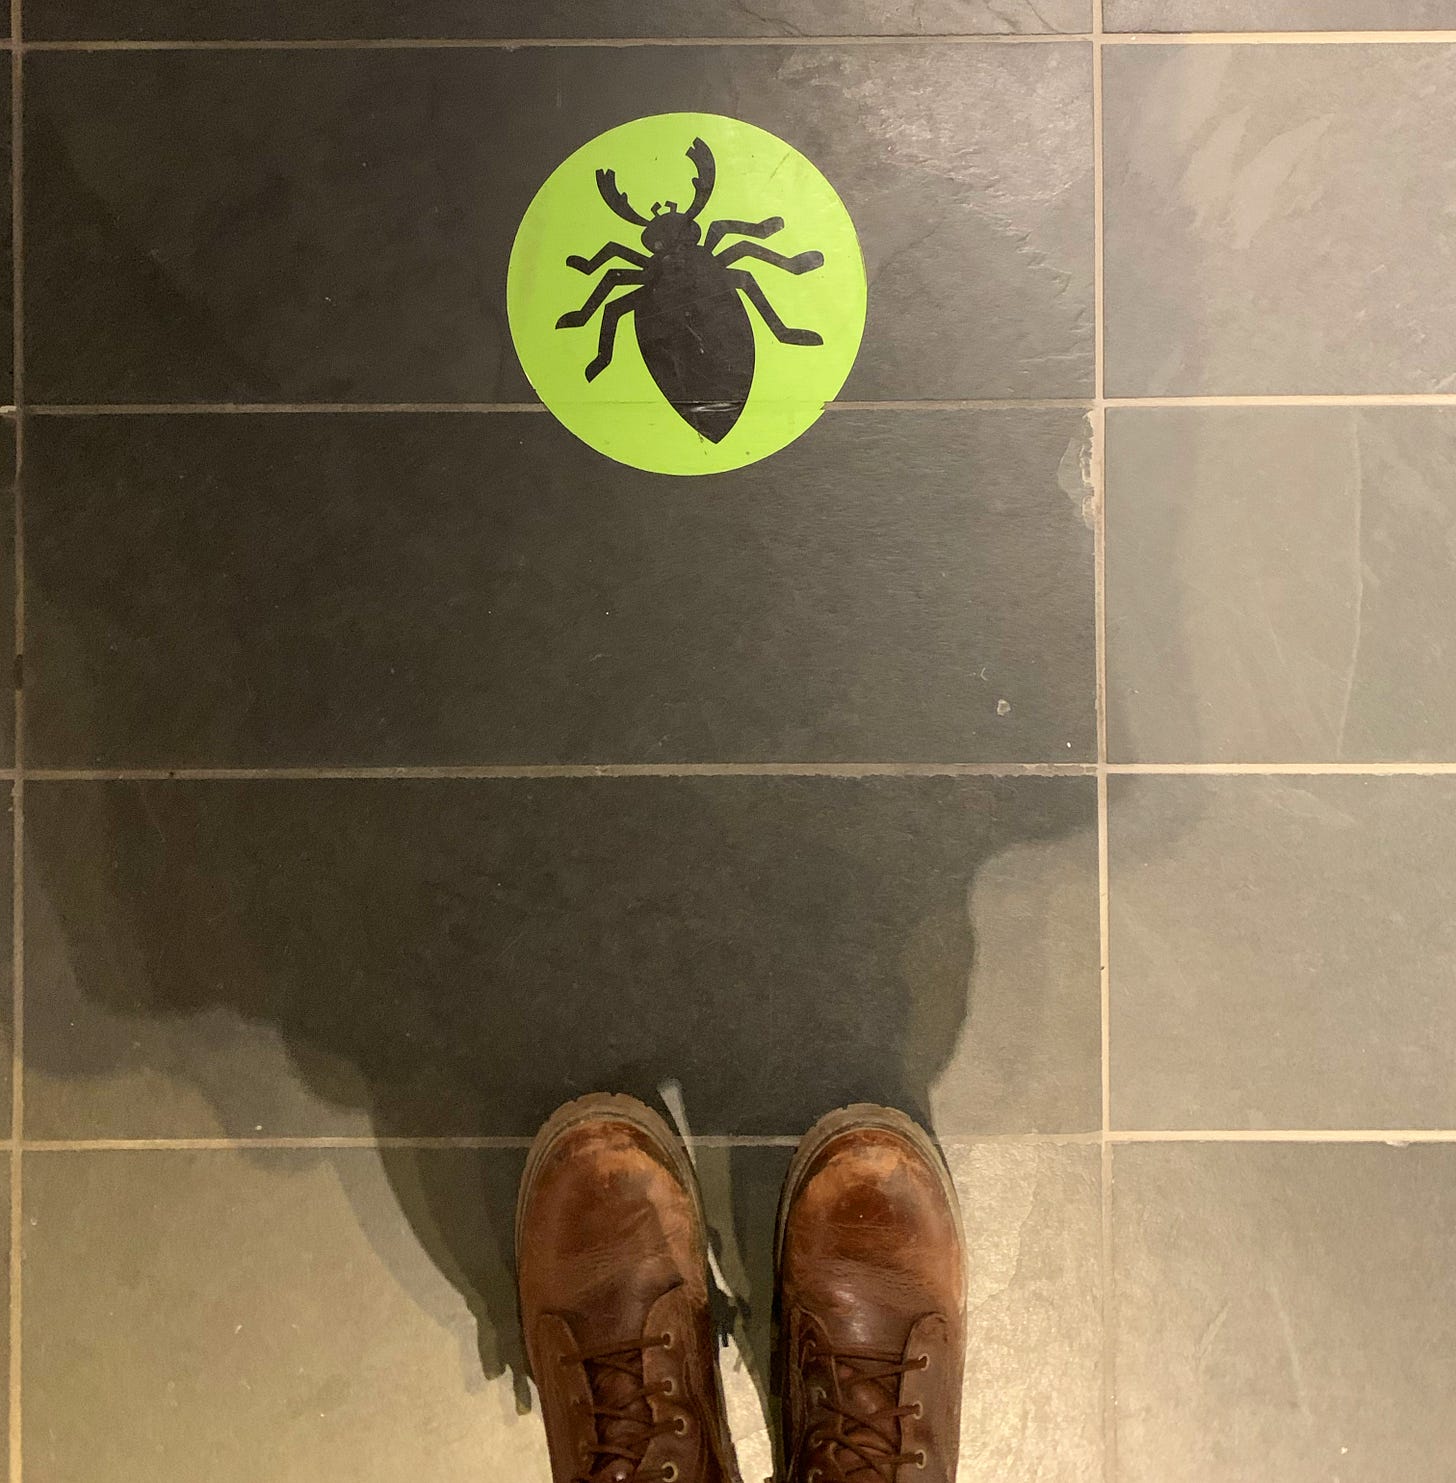 The two feet of the photographer in big brown boots, and in front of them a round, green stick on the floor with a drawing of a bug